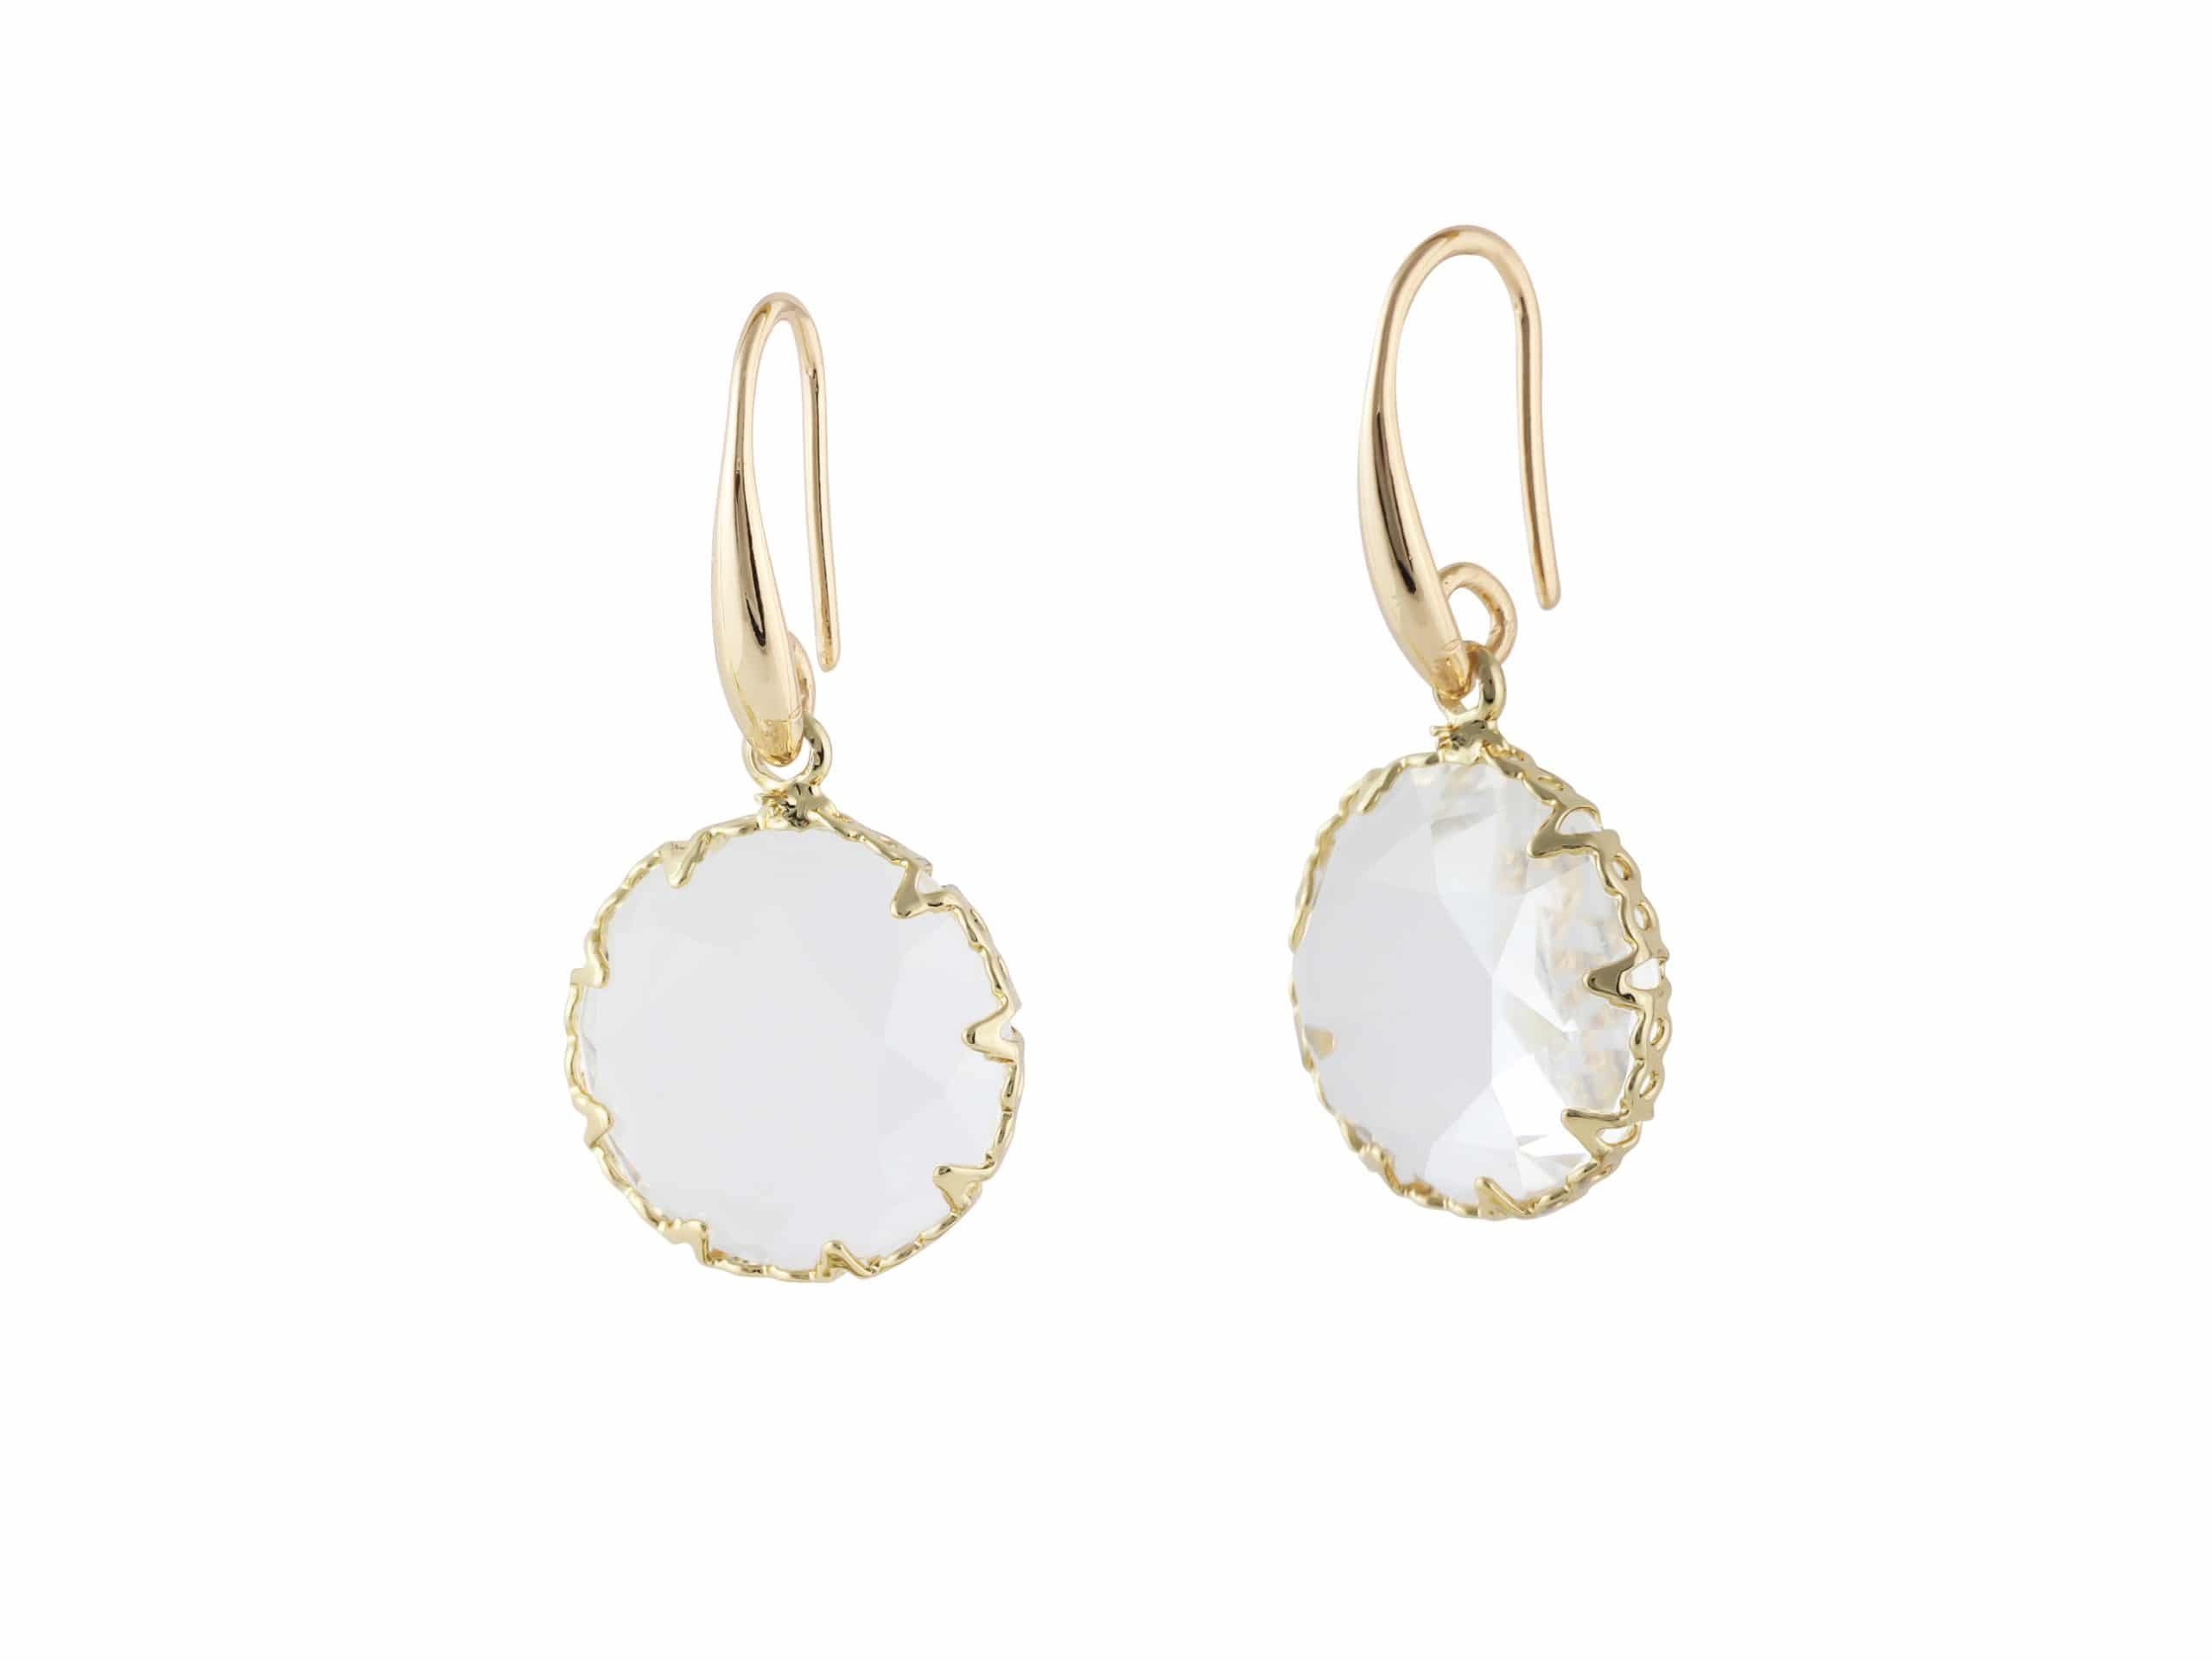 Danielle Crystal Round Earrings in Gold and Crystal – Big Metal London